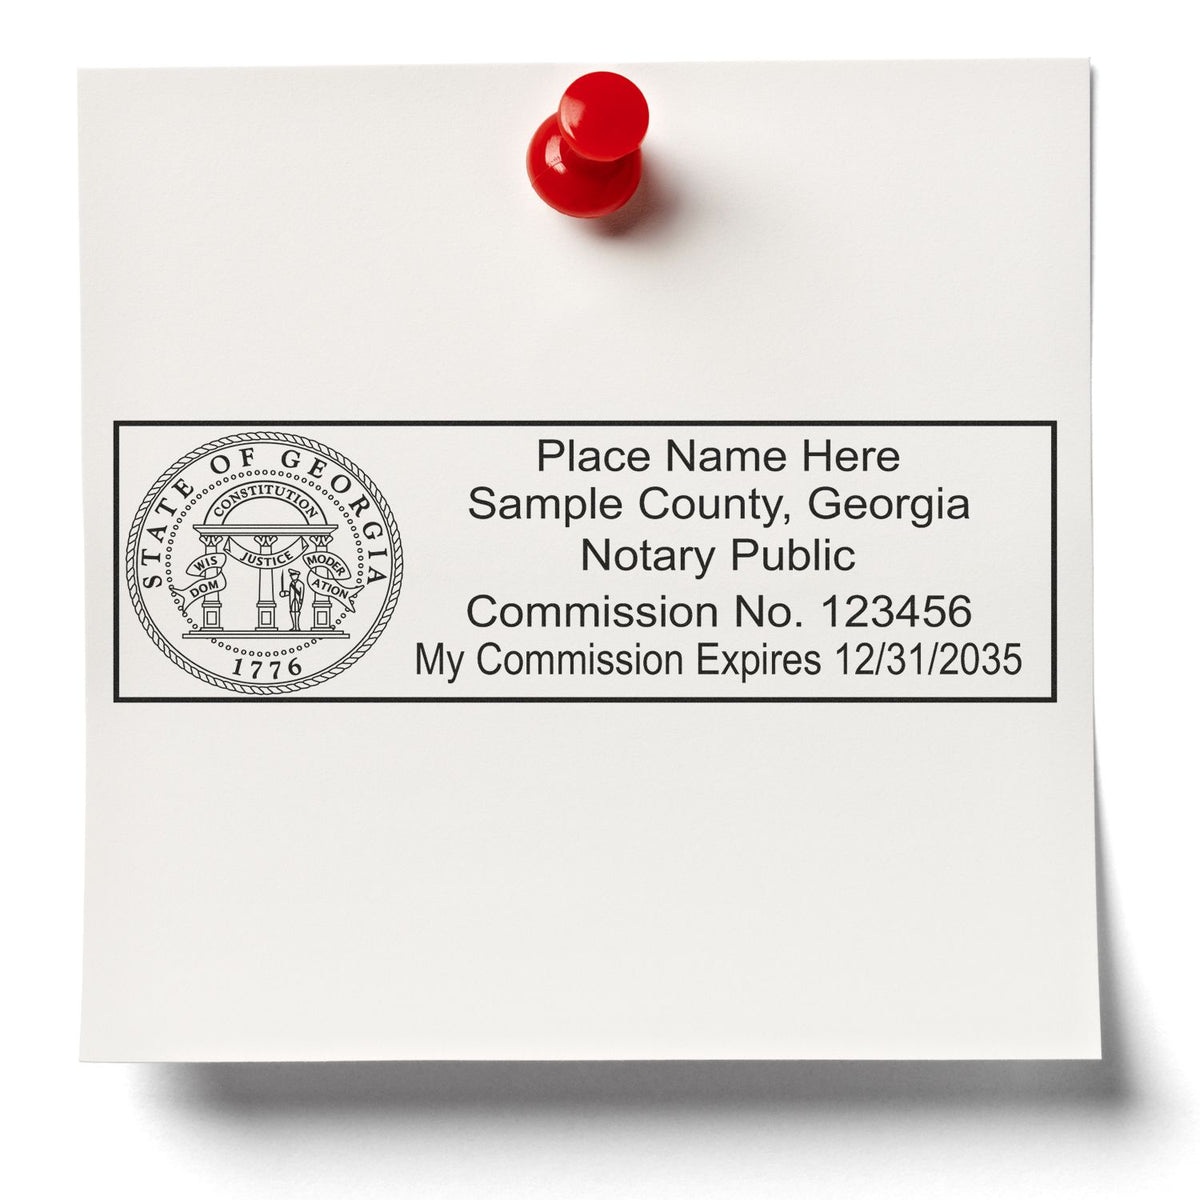 A stamped impression of the Slim Pre-Inked Rectangular Notary Stamp for Georgia in this stylish lifestyle photo, setting the tone for a unique and personalized product.